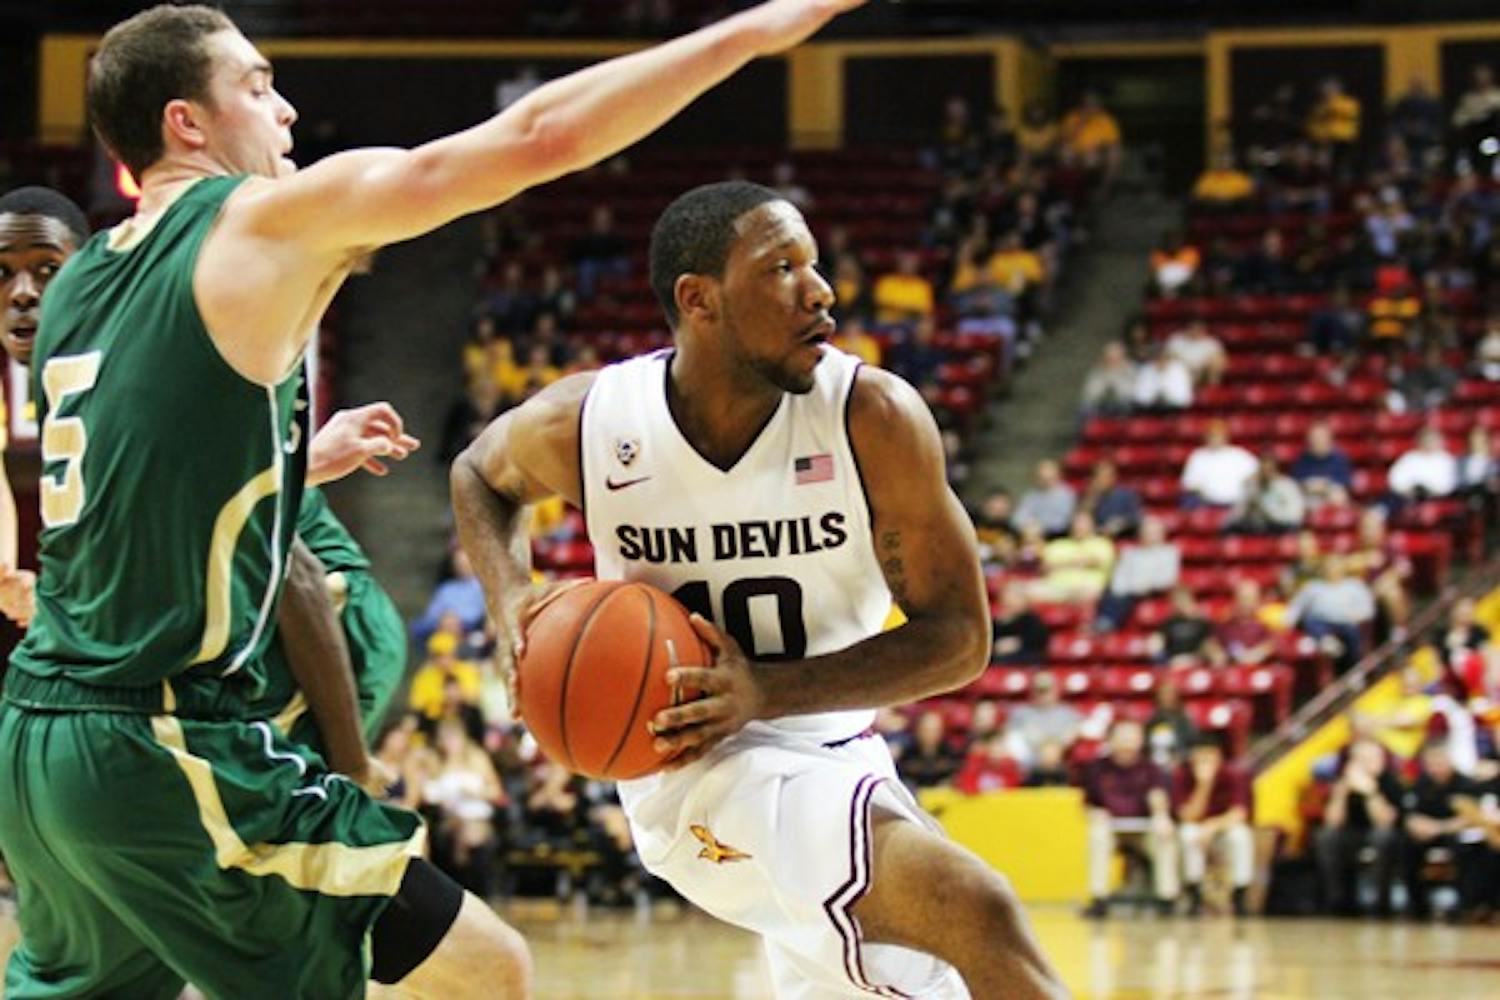 Junior guard Evan Gordon looks to the corner while driving to the basket in ASU’s 90-70 victory over Sacramento State on Dec. 1. (Photo by Kyle Newman)